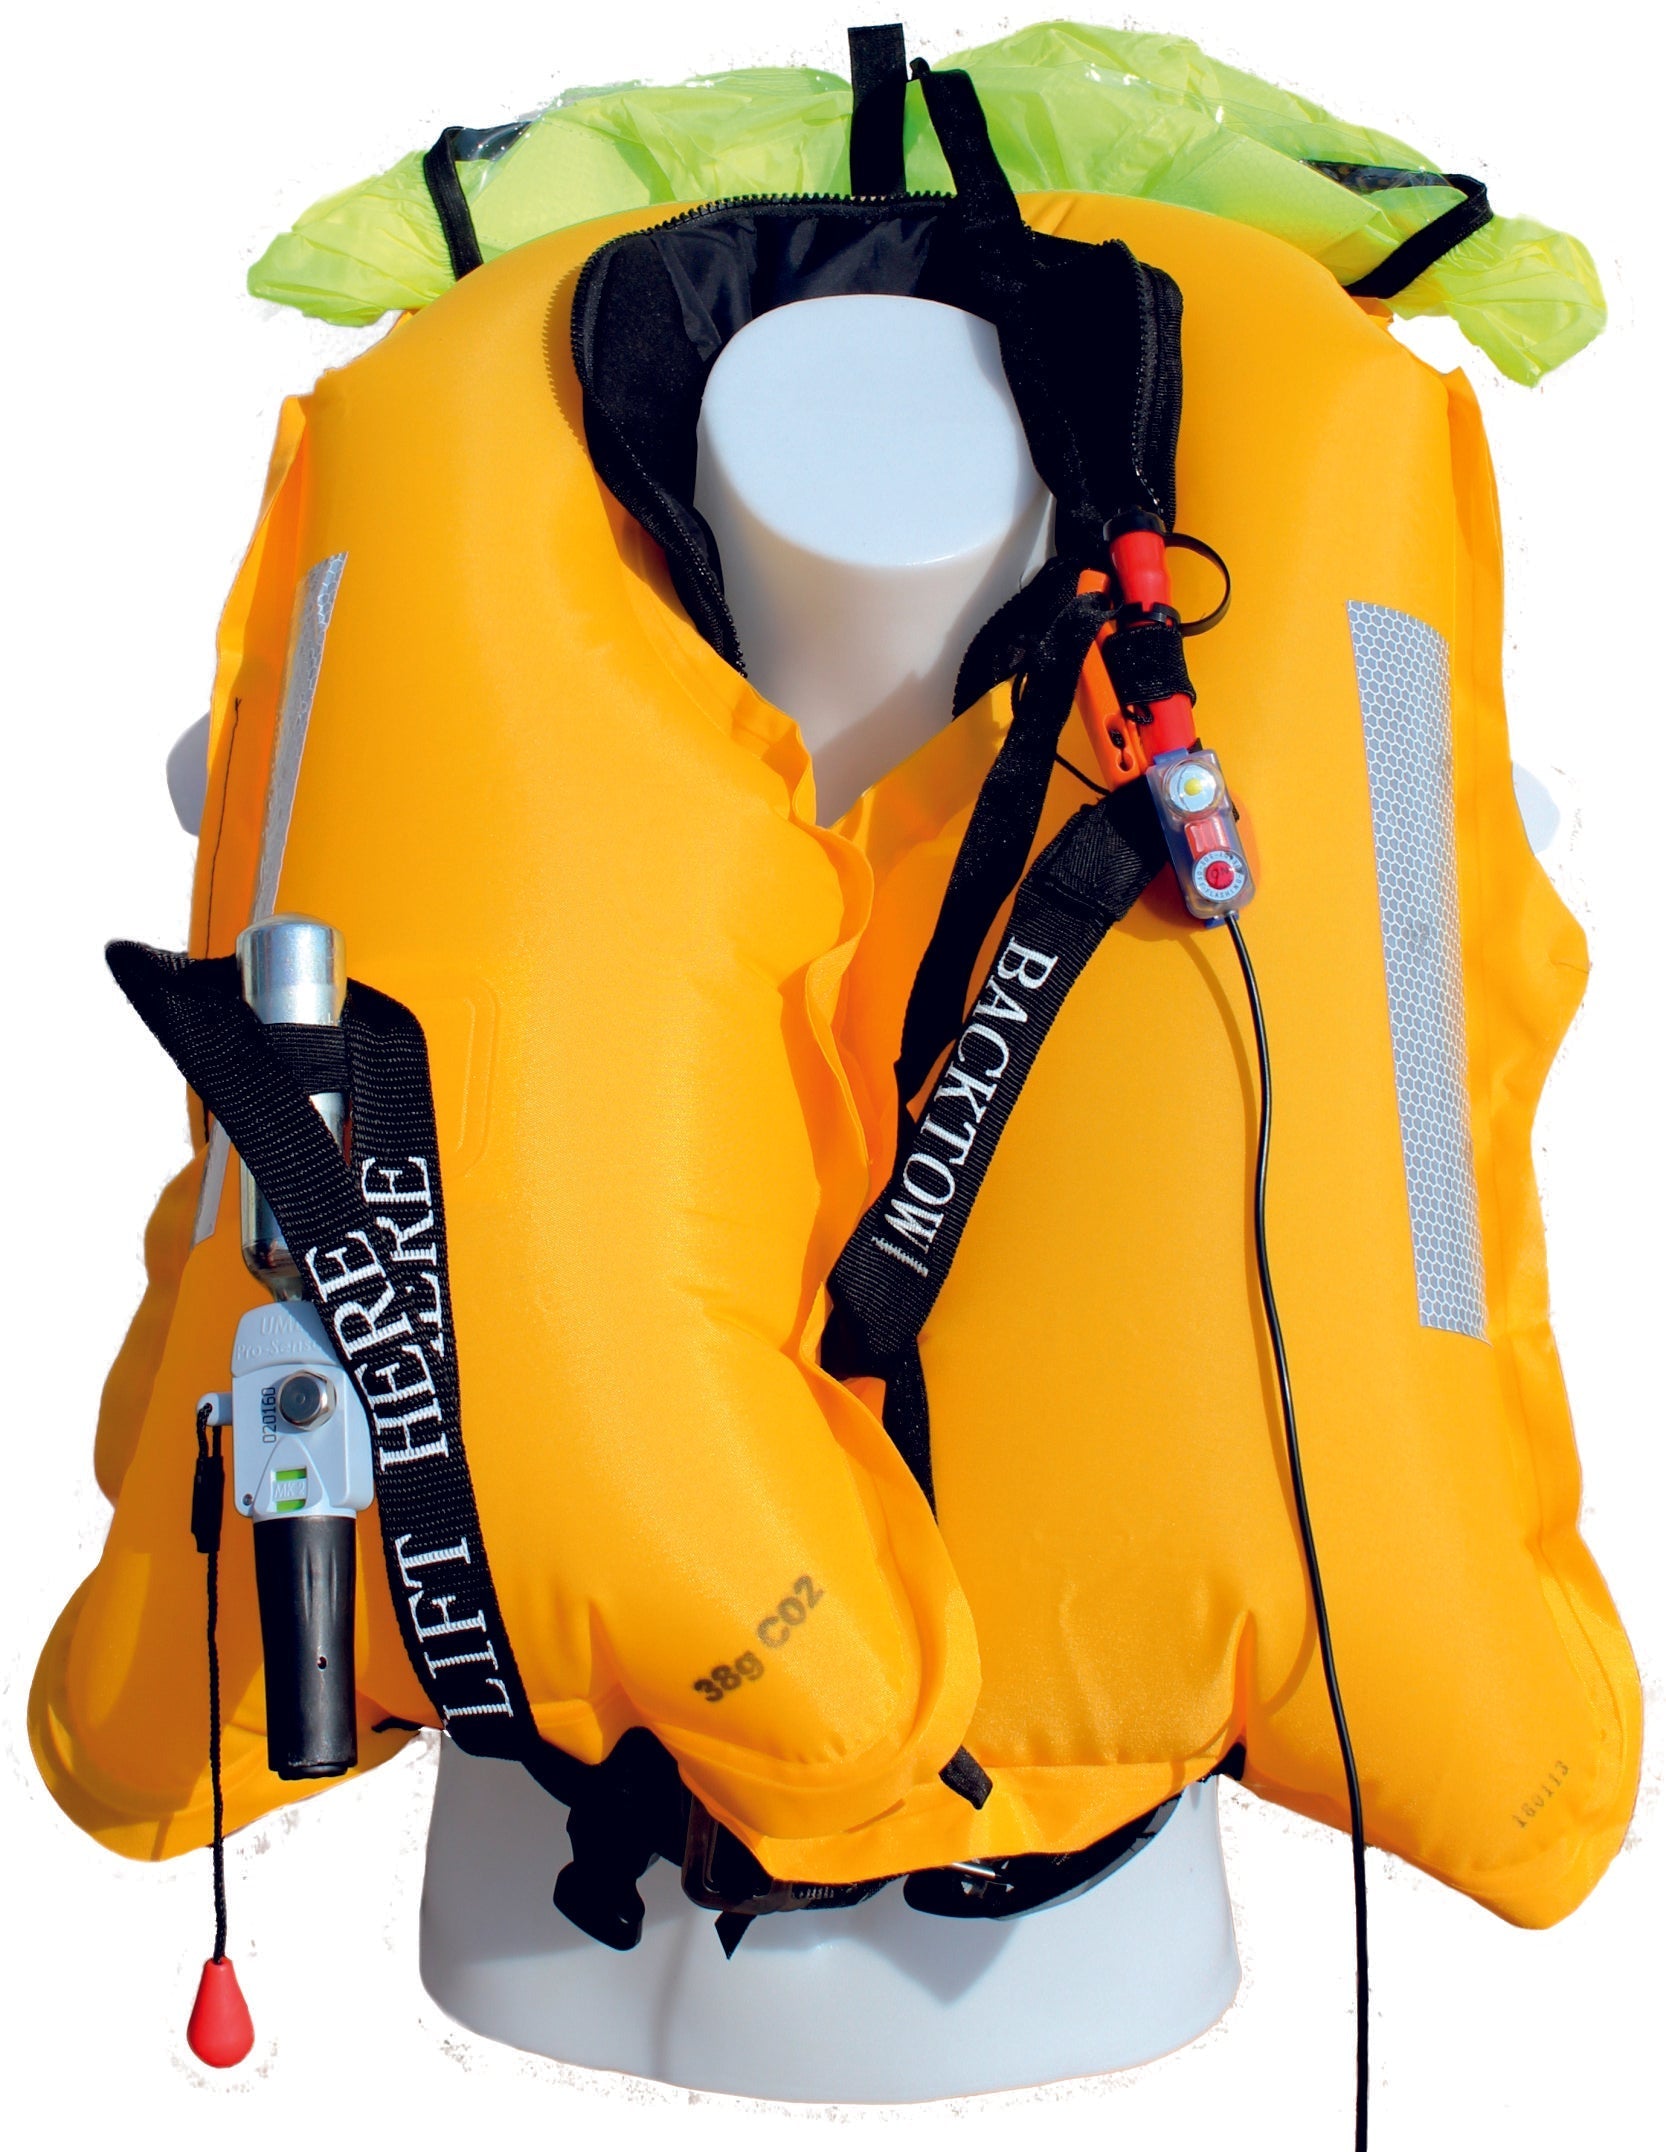 Inflated 275N BackTow inflatable PFD - Contains light, whistle, spray hood, fluorescent material